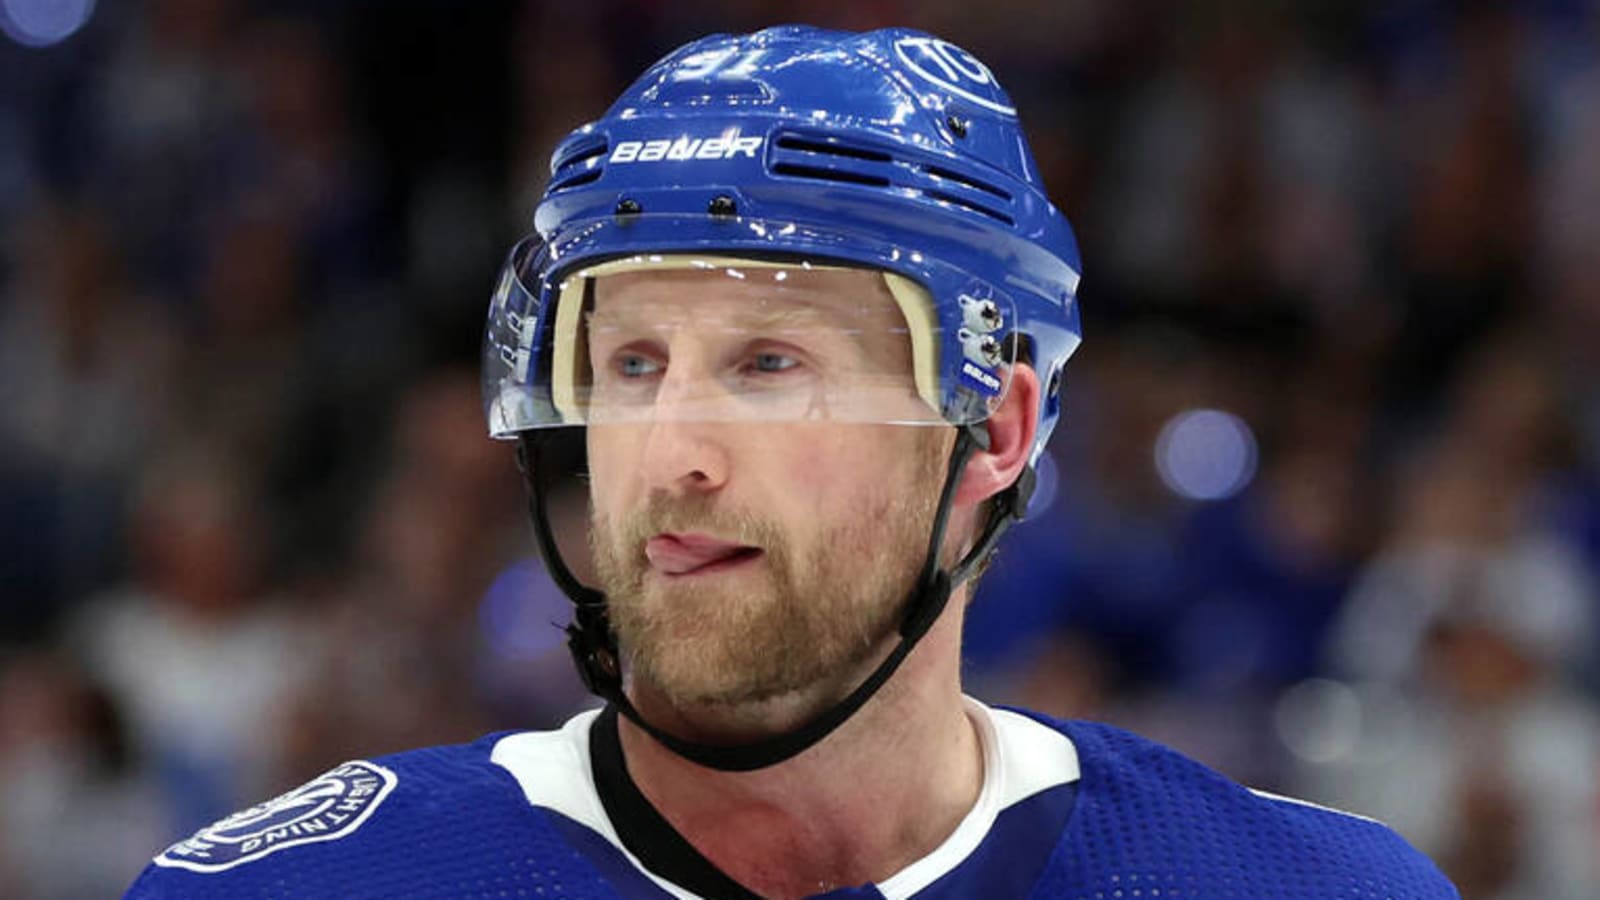 To stay in Tampa Bay, Steven Stamkos will have to sign on the cheap